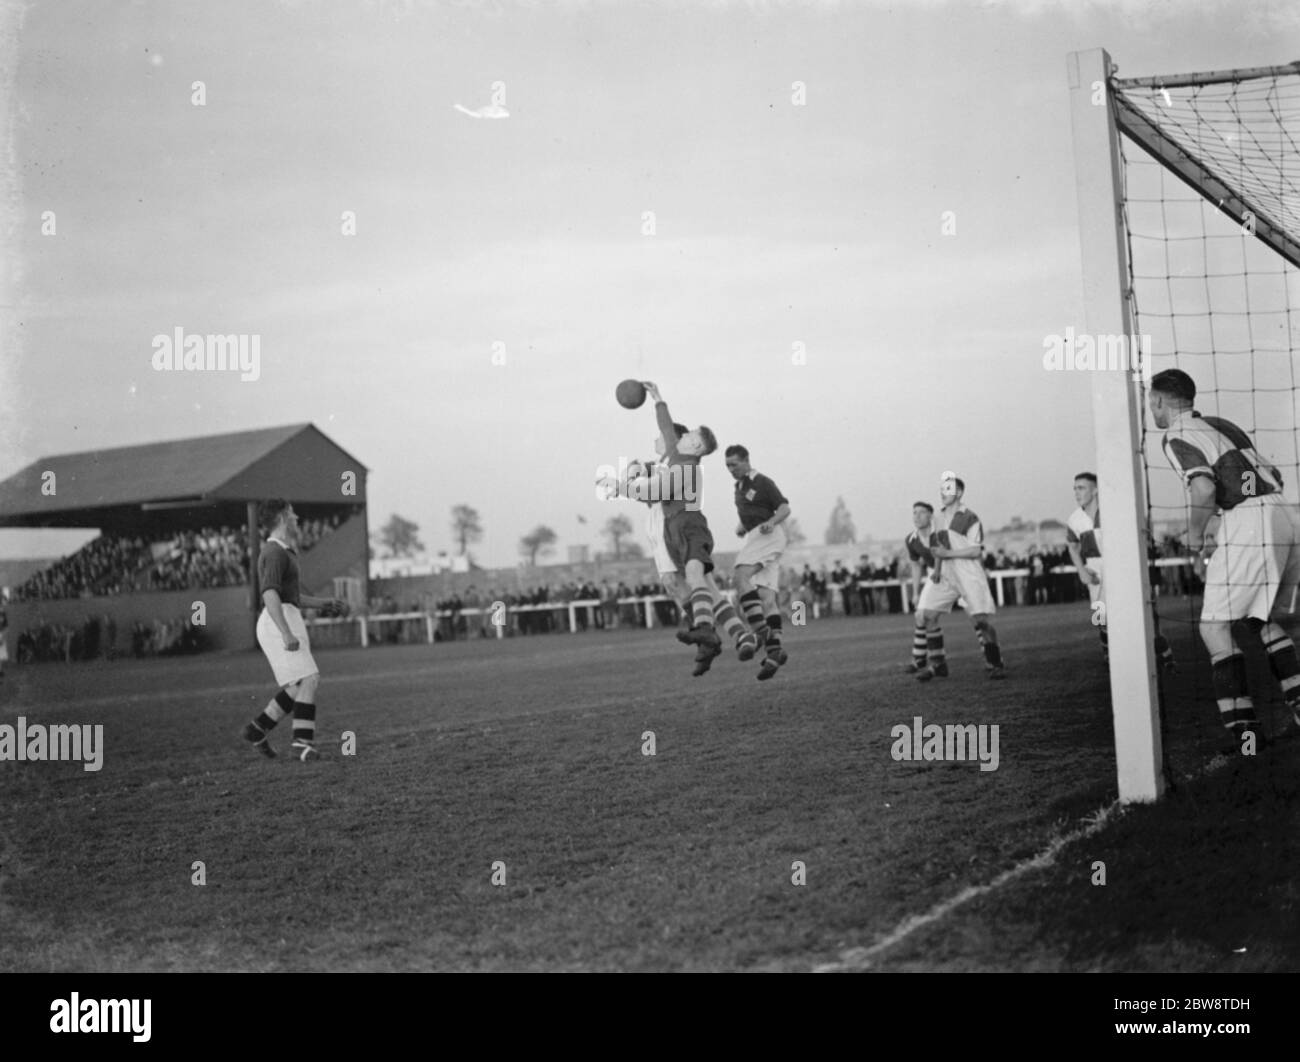 London Paper Mills vs. Erith and Belvedere - Kent League - 05/11/38 Goalkeeper comes out to collect the ball . 1938 Stock Photo